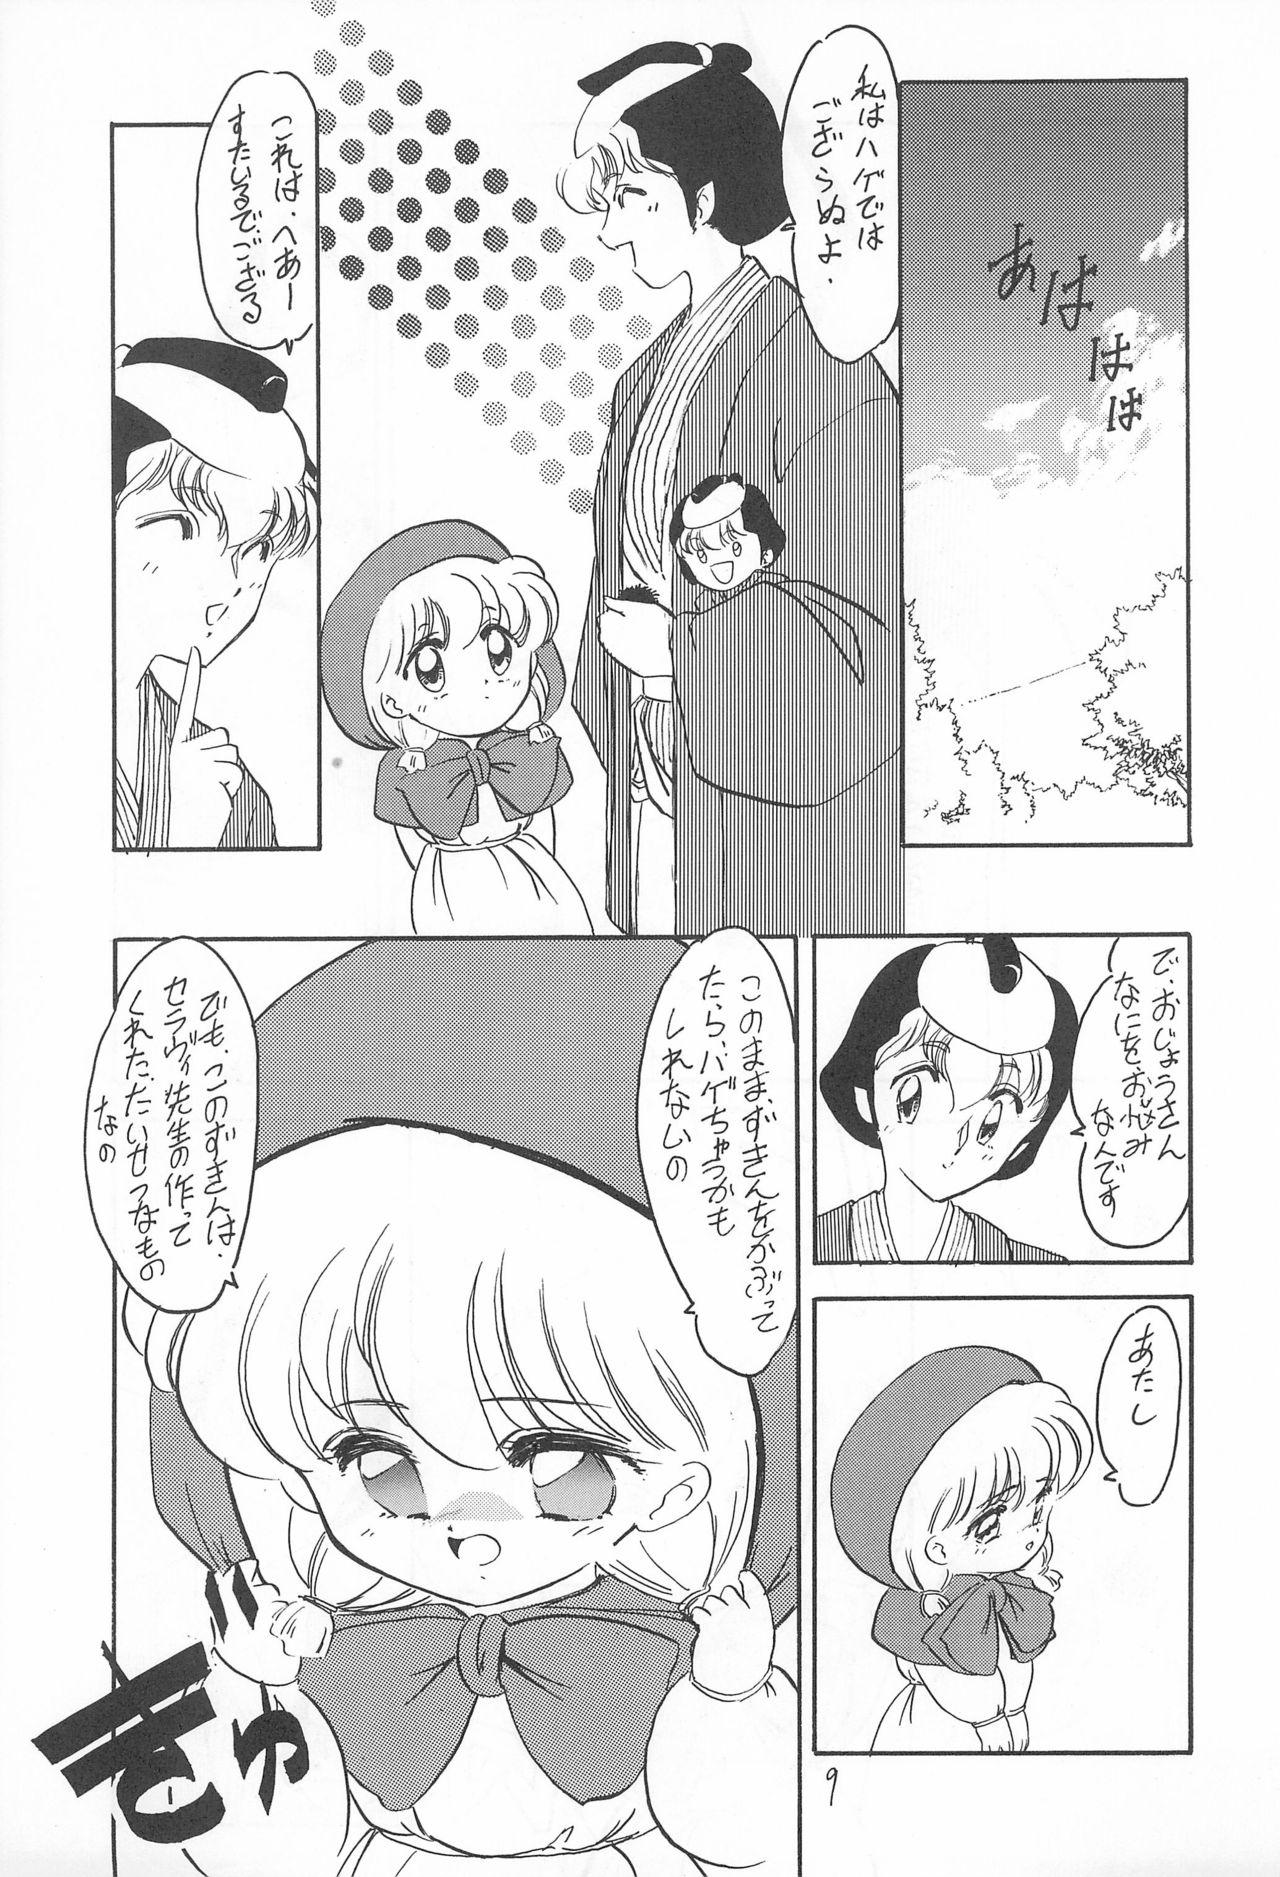 Instagram Omote Chacha - Akazukin chacha | red riding hood chacha Cocksuckers - Page 9